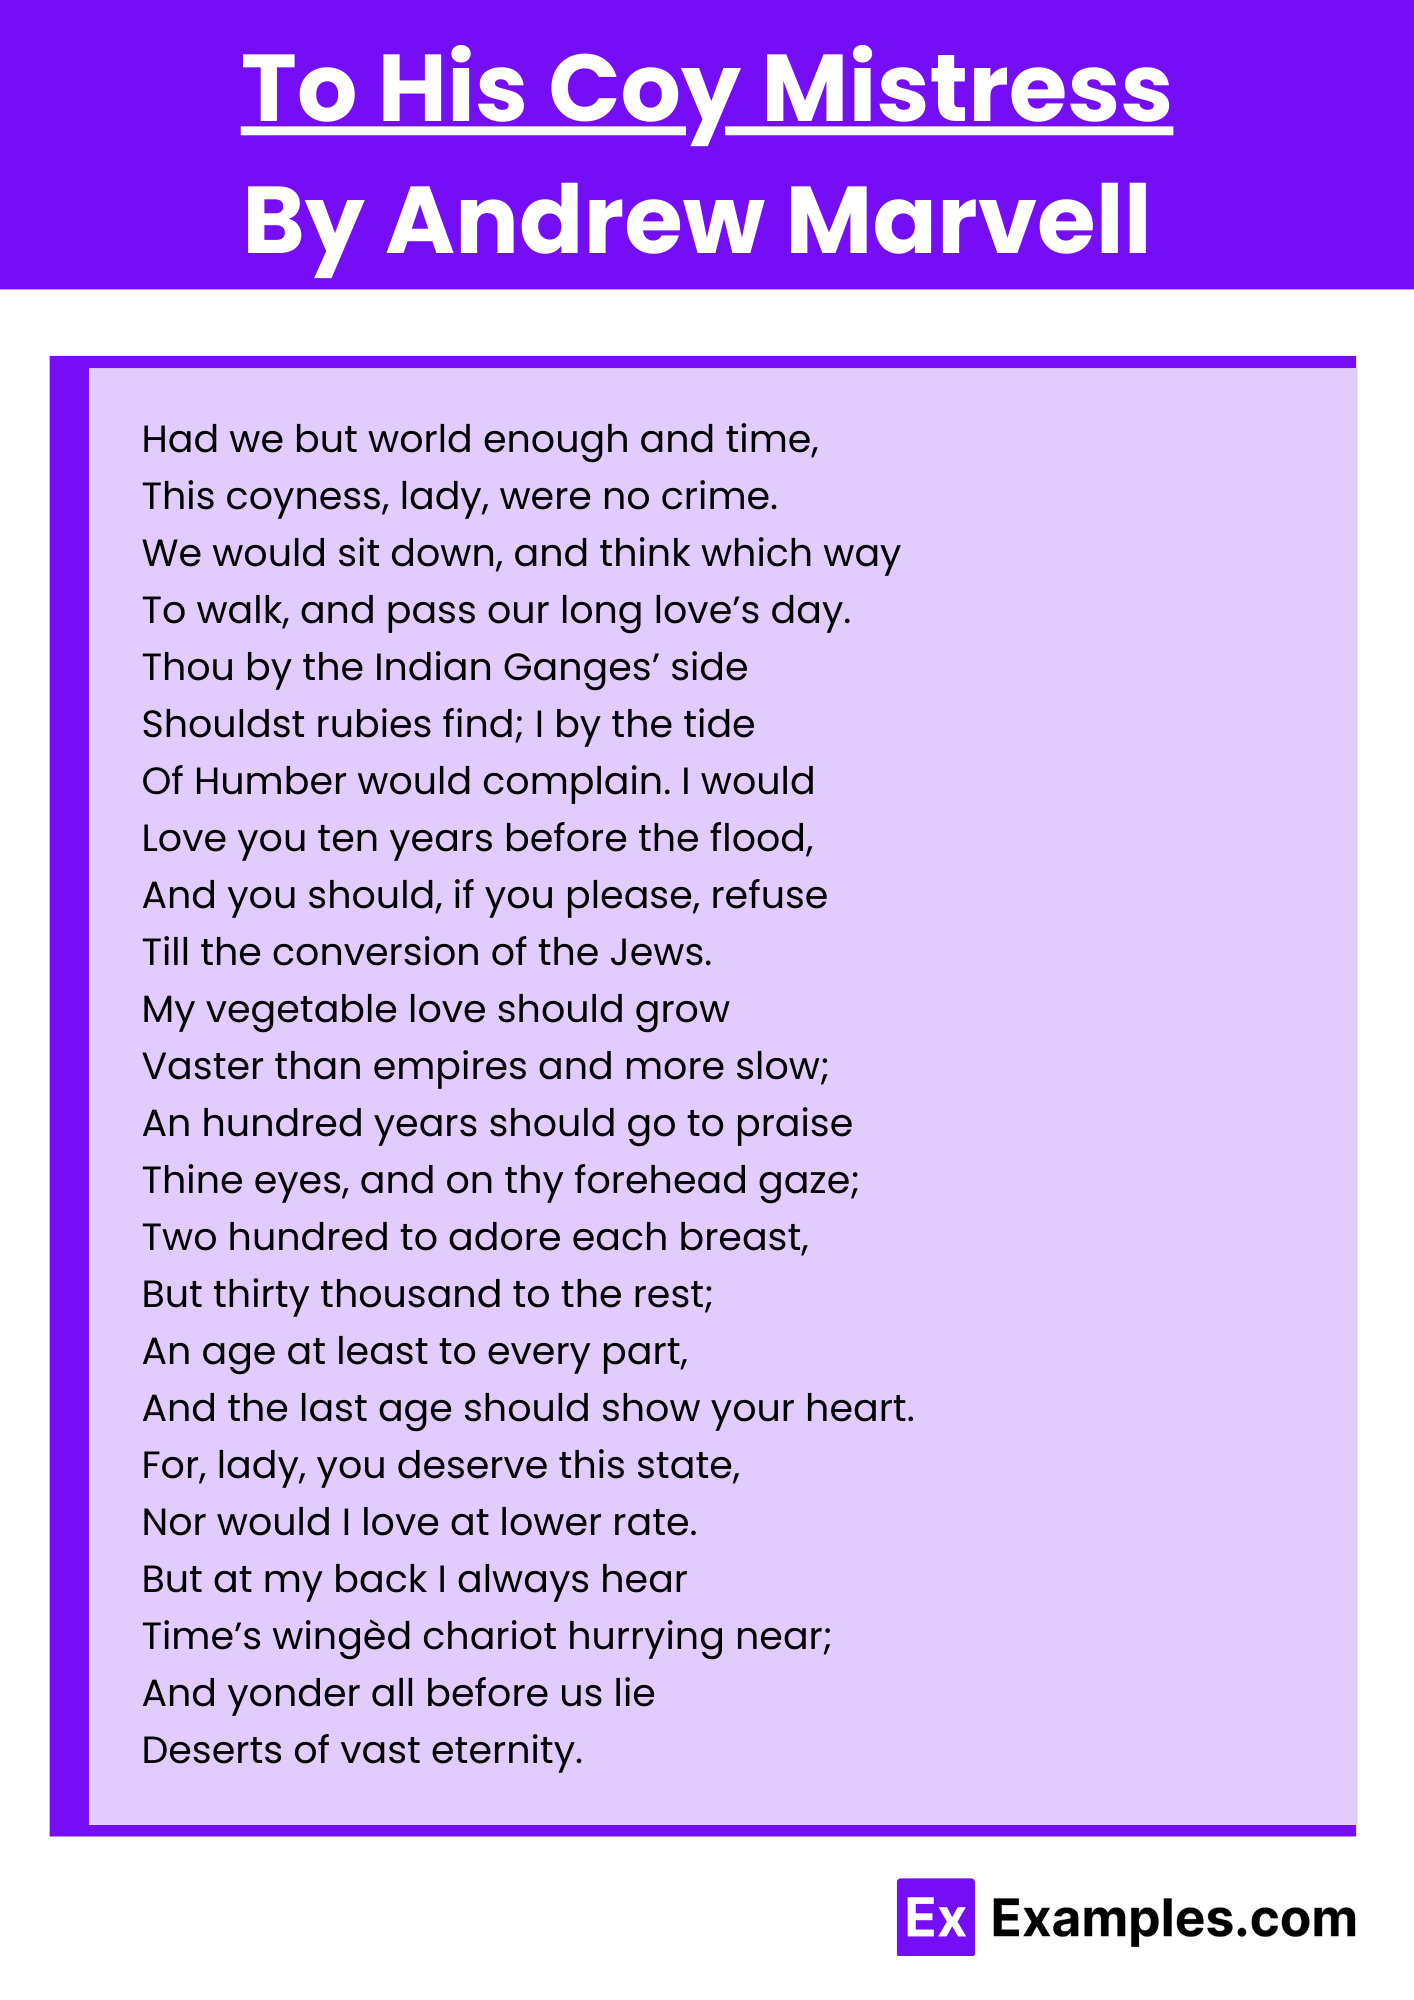 To His Coy Mistress By Andrew Marvell